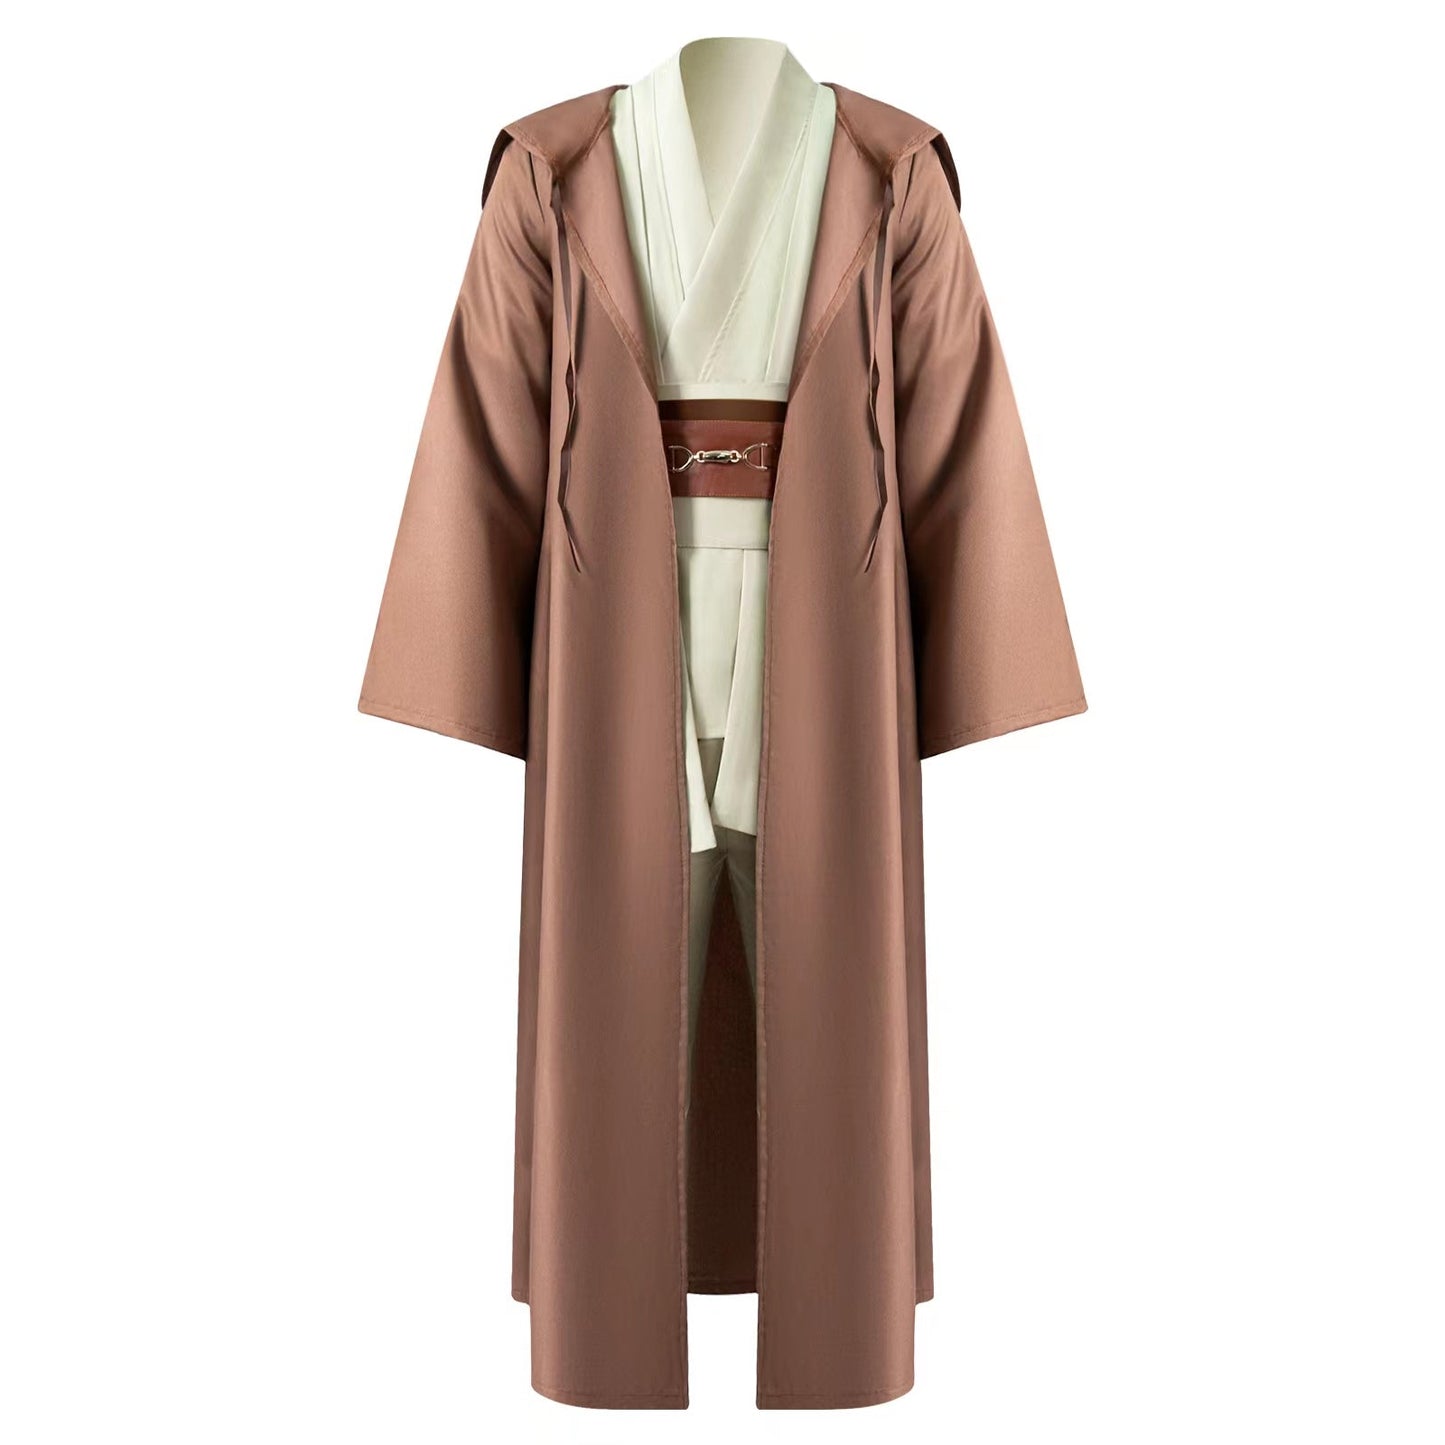 Adult Cosplay Robe-Costumes-Padawan Outpost